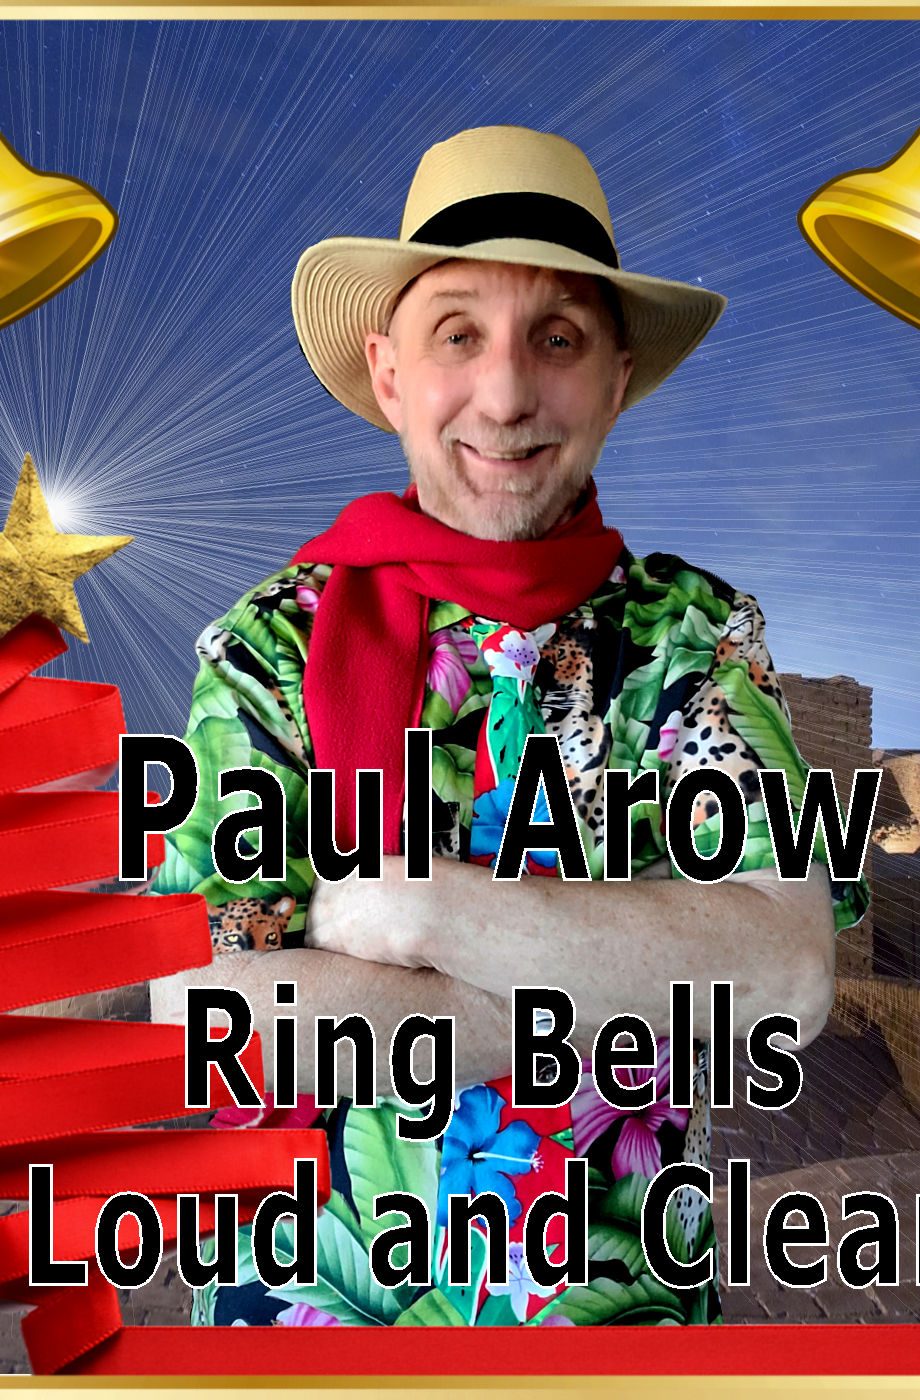 Ring Bells Loud and Clear is a Christmas song written, arranged and performed by Paul Arow.